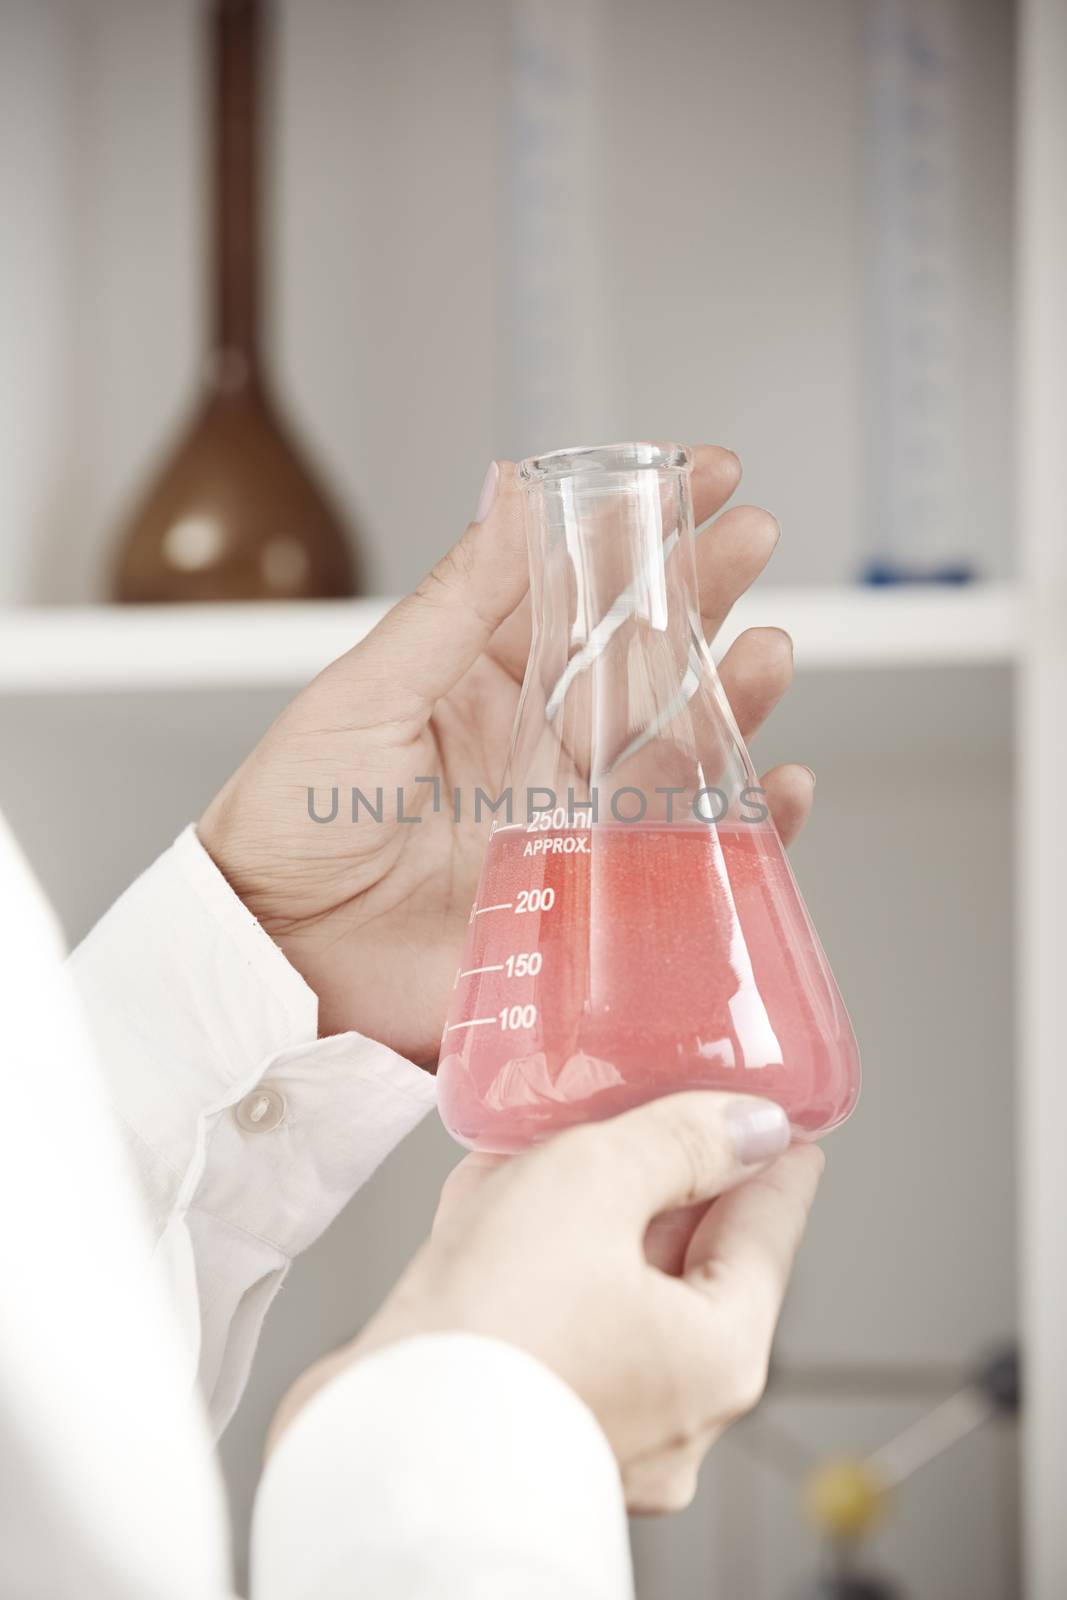 Hands of laboratory technician holding flask with red liquid